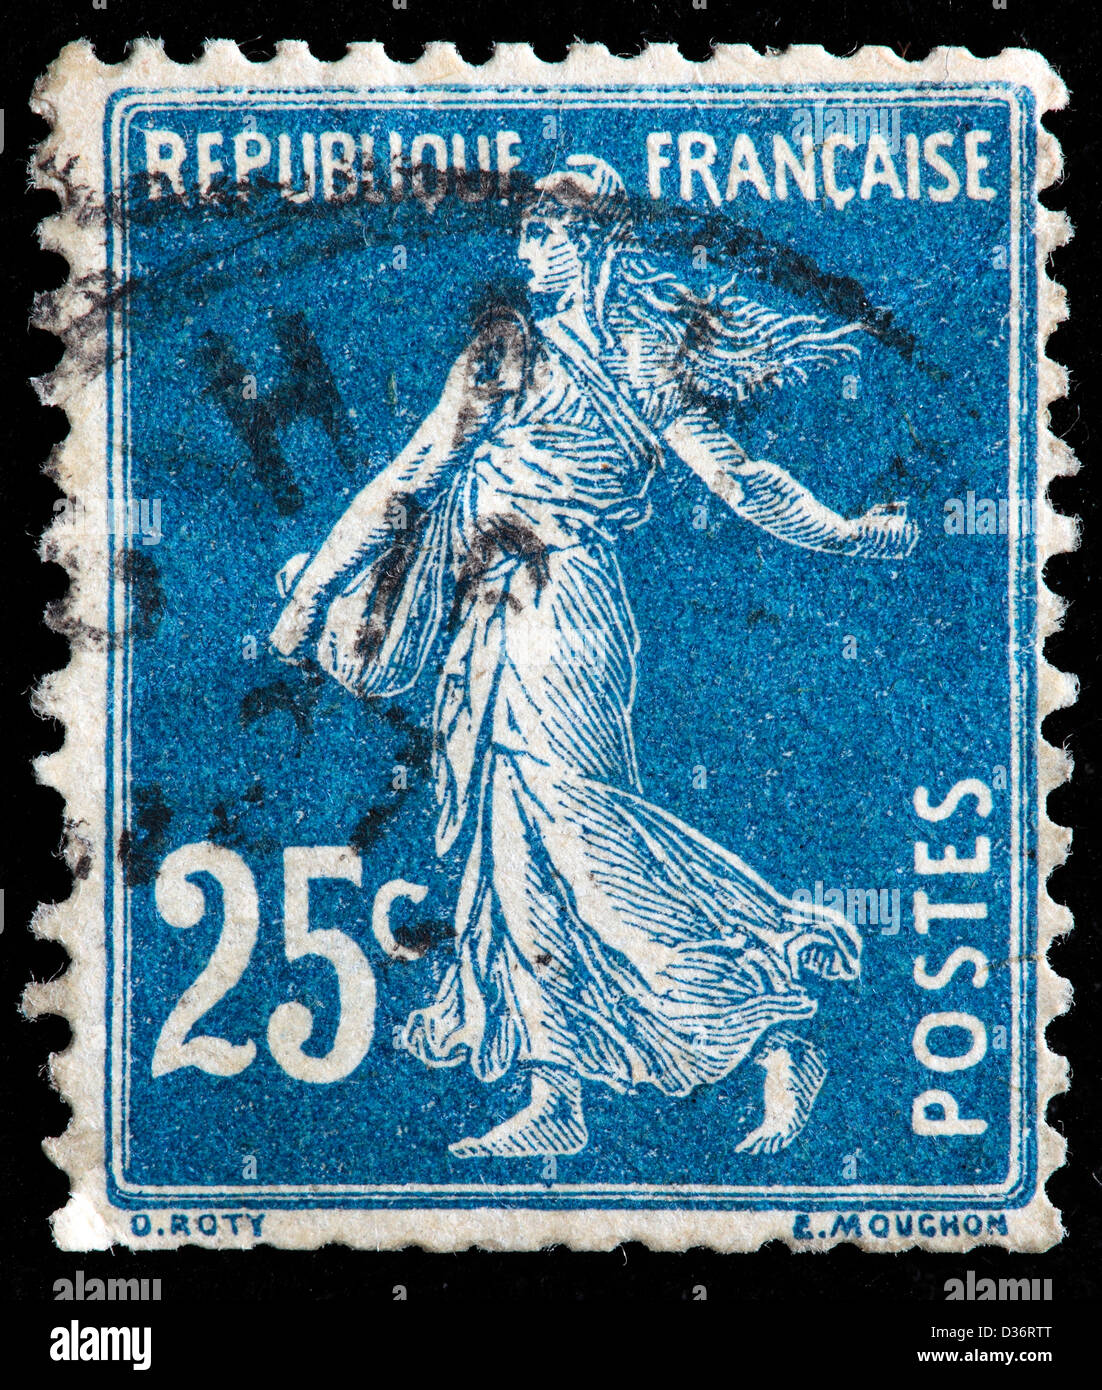 100 French Stamps 15f Used Blue Postage Stamps, Vintage Marianne Post Stamps  From France FREE POSTAGE 